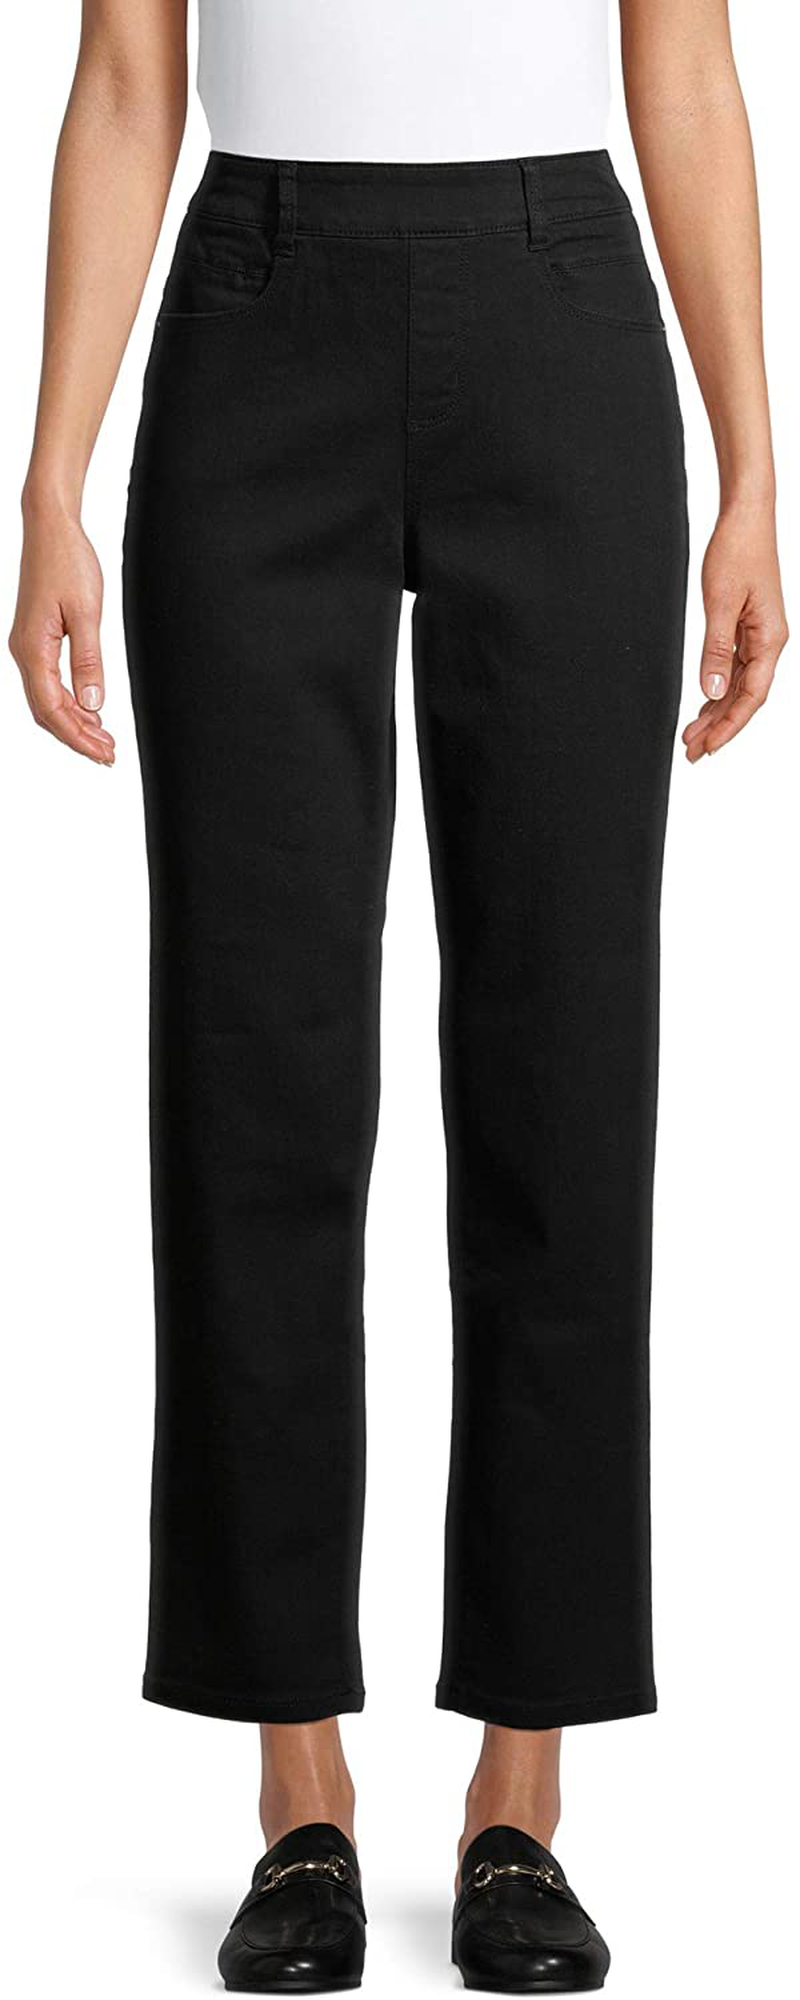 Women's Pull On-On Stretch Time and True Millennium Pants Straight Size: 6  to 20